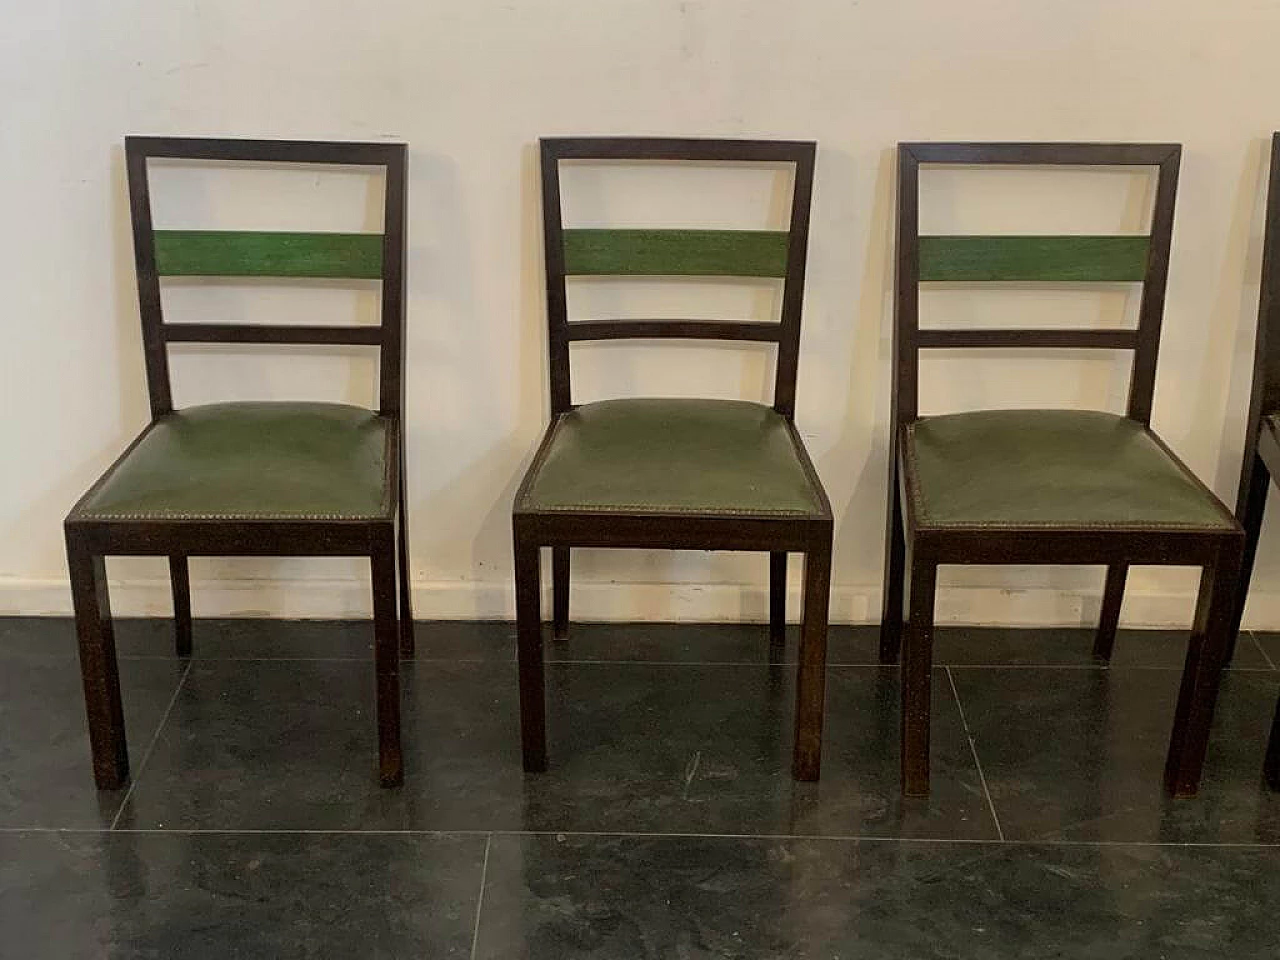 4 Art Deco style chairs in green-stained wood, 1930s 2